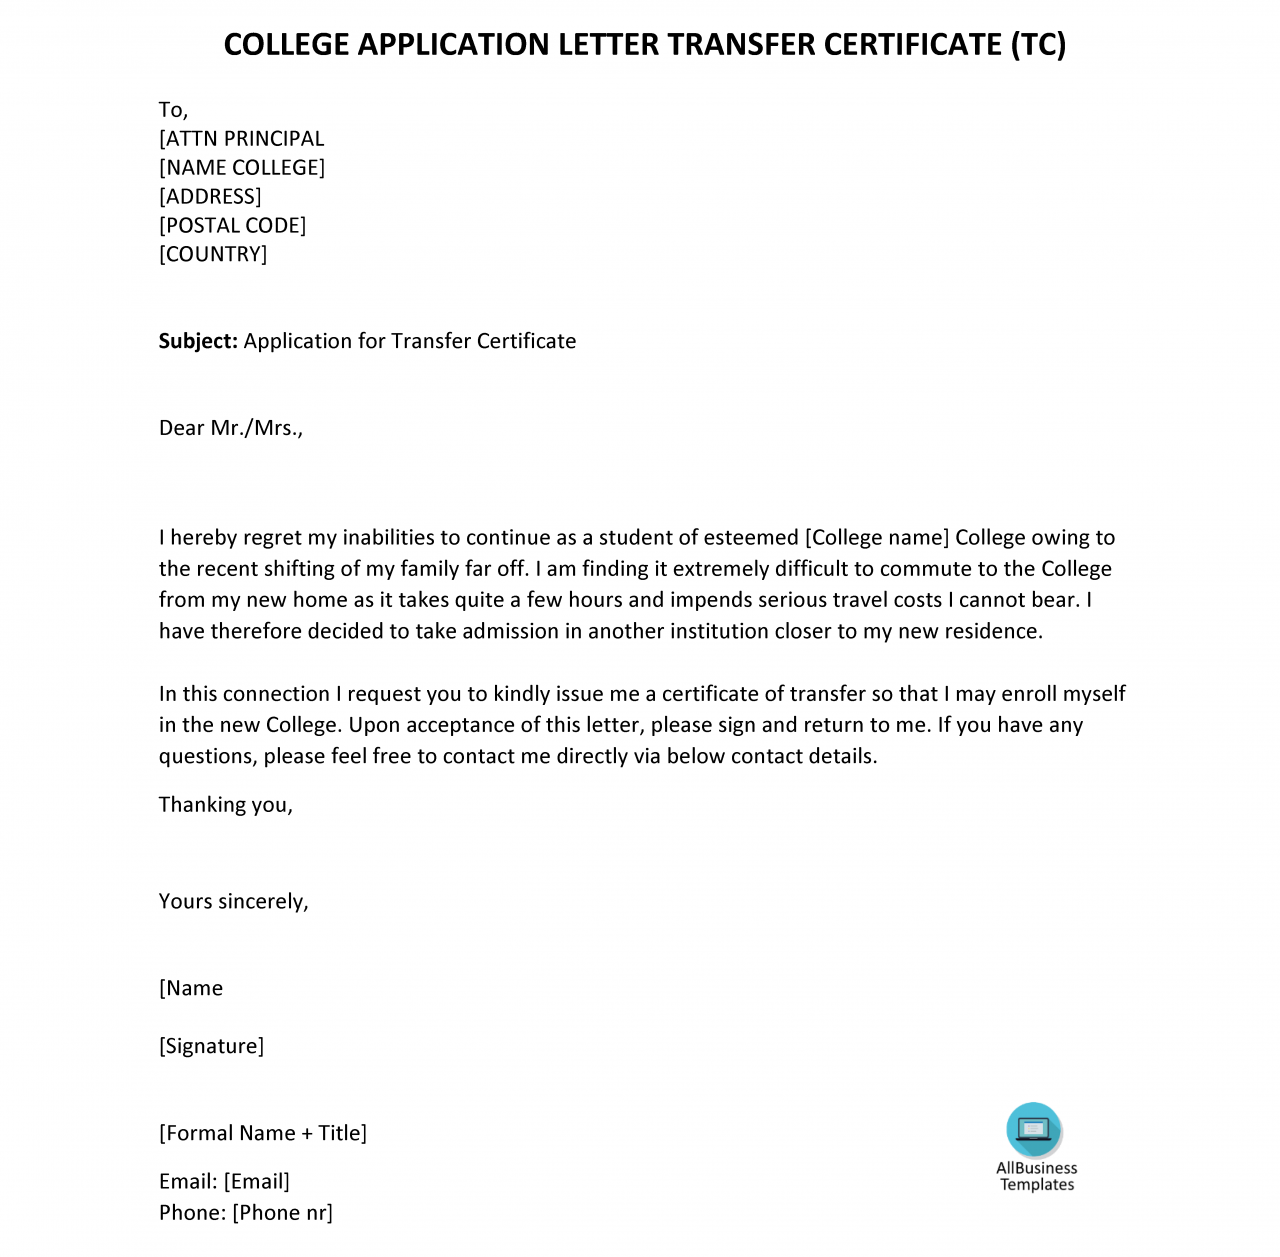 Format to write an application letter